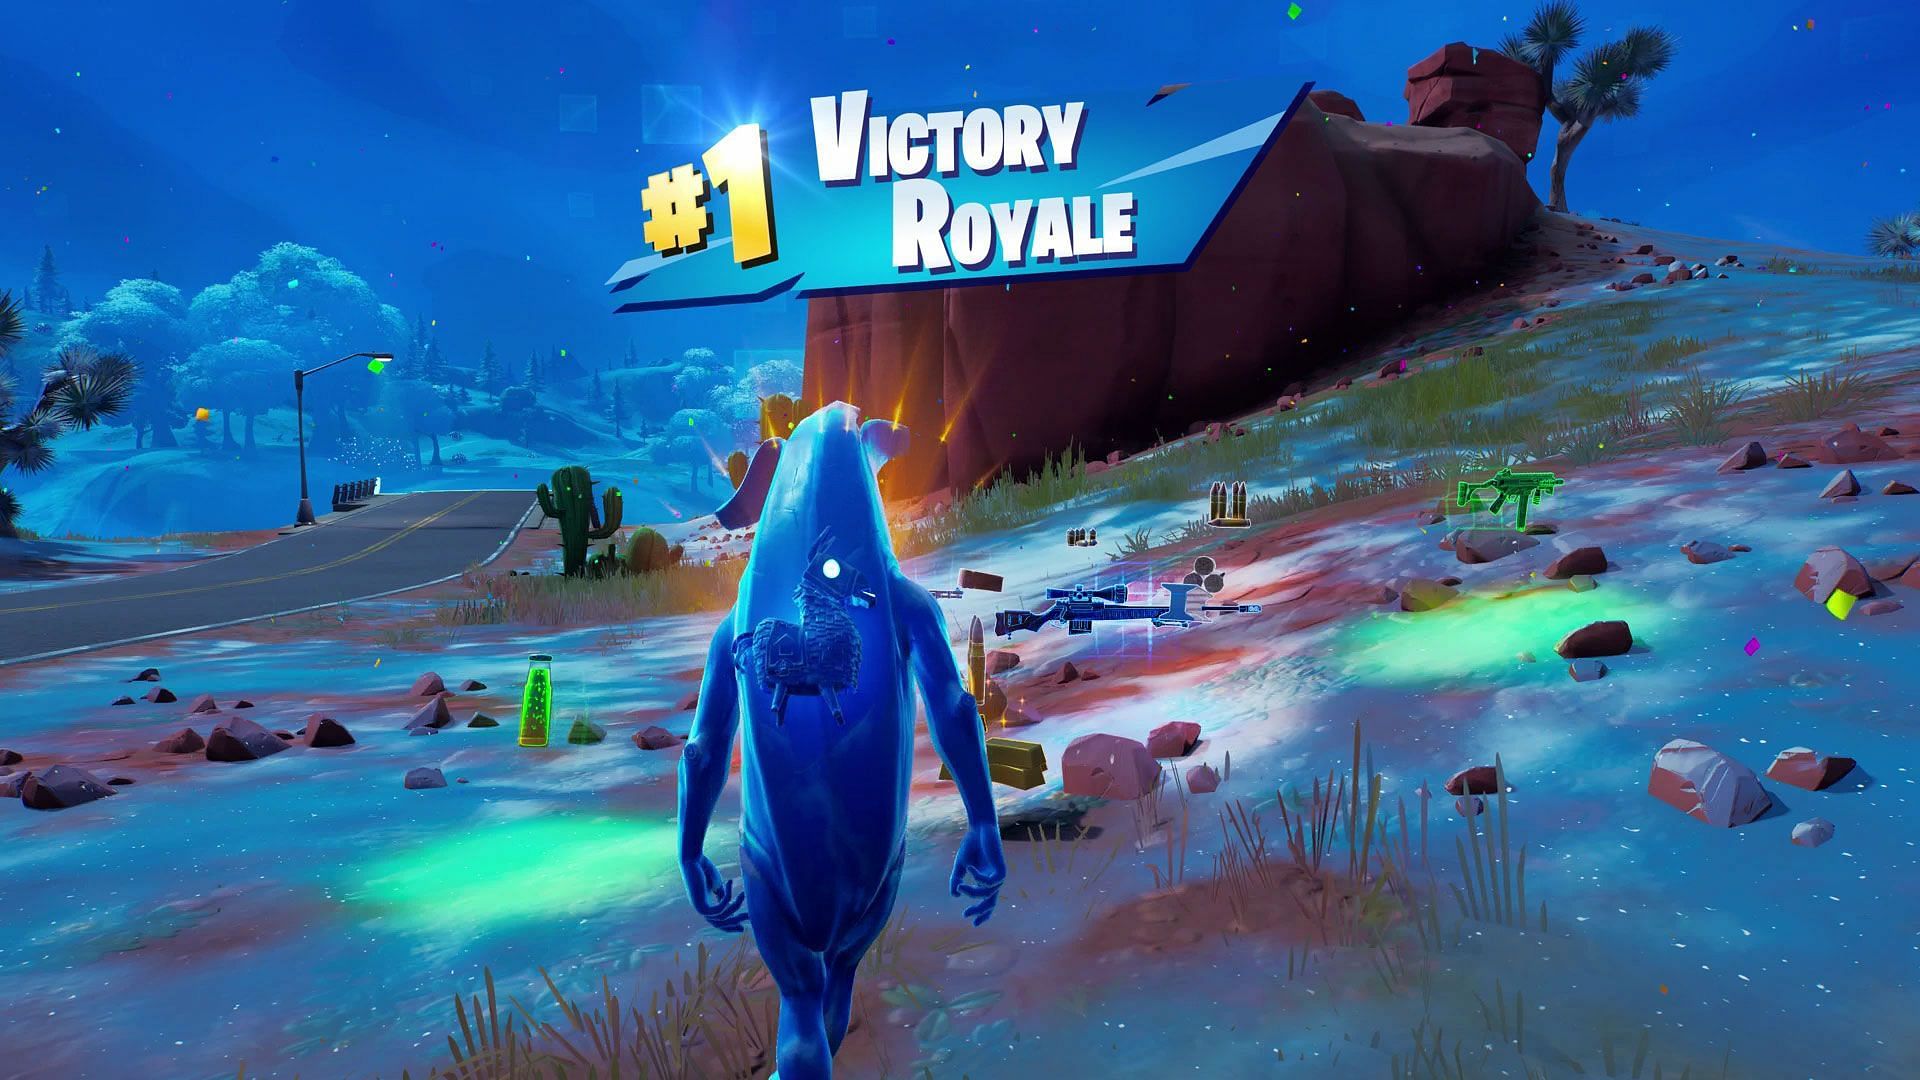 5 Fortnite players with the most wins in the history of the game